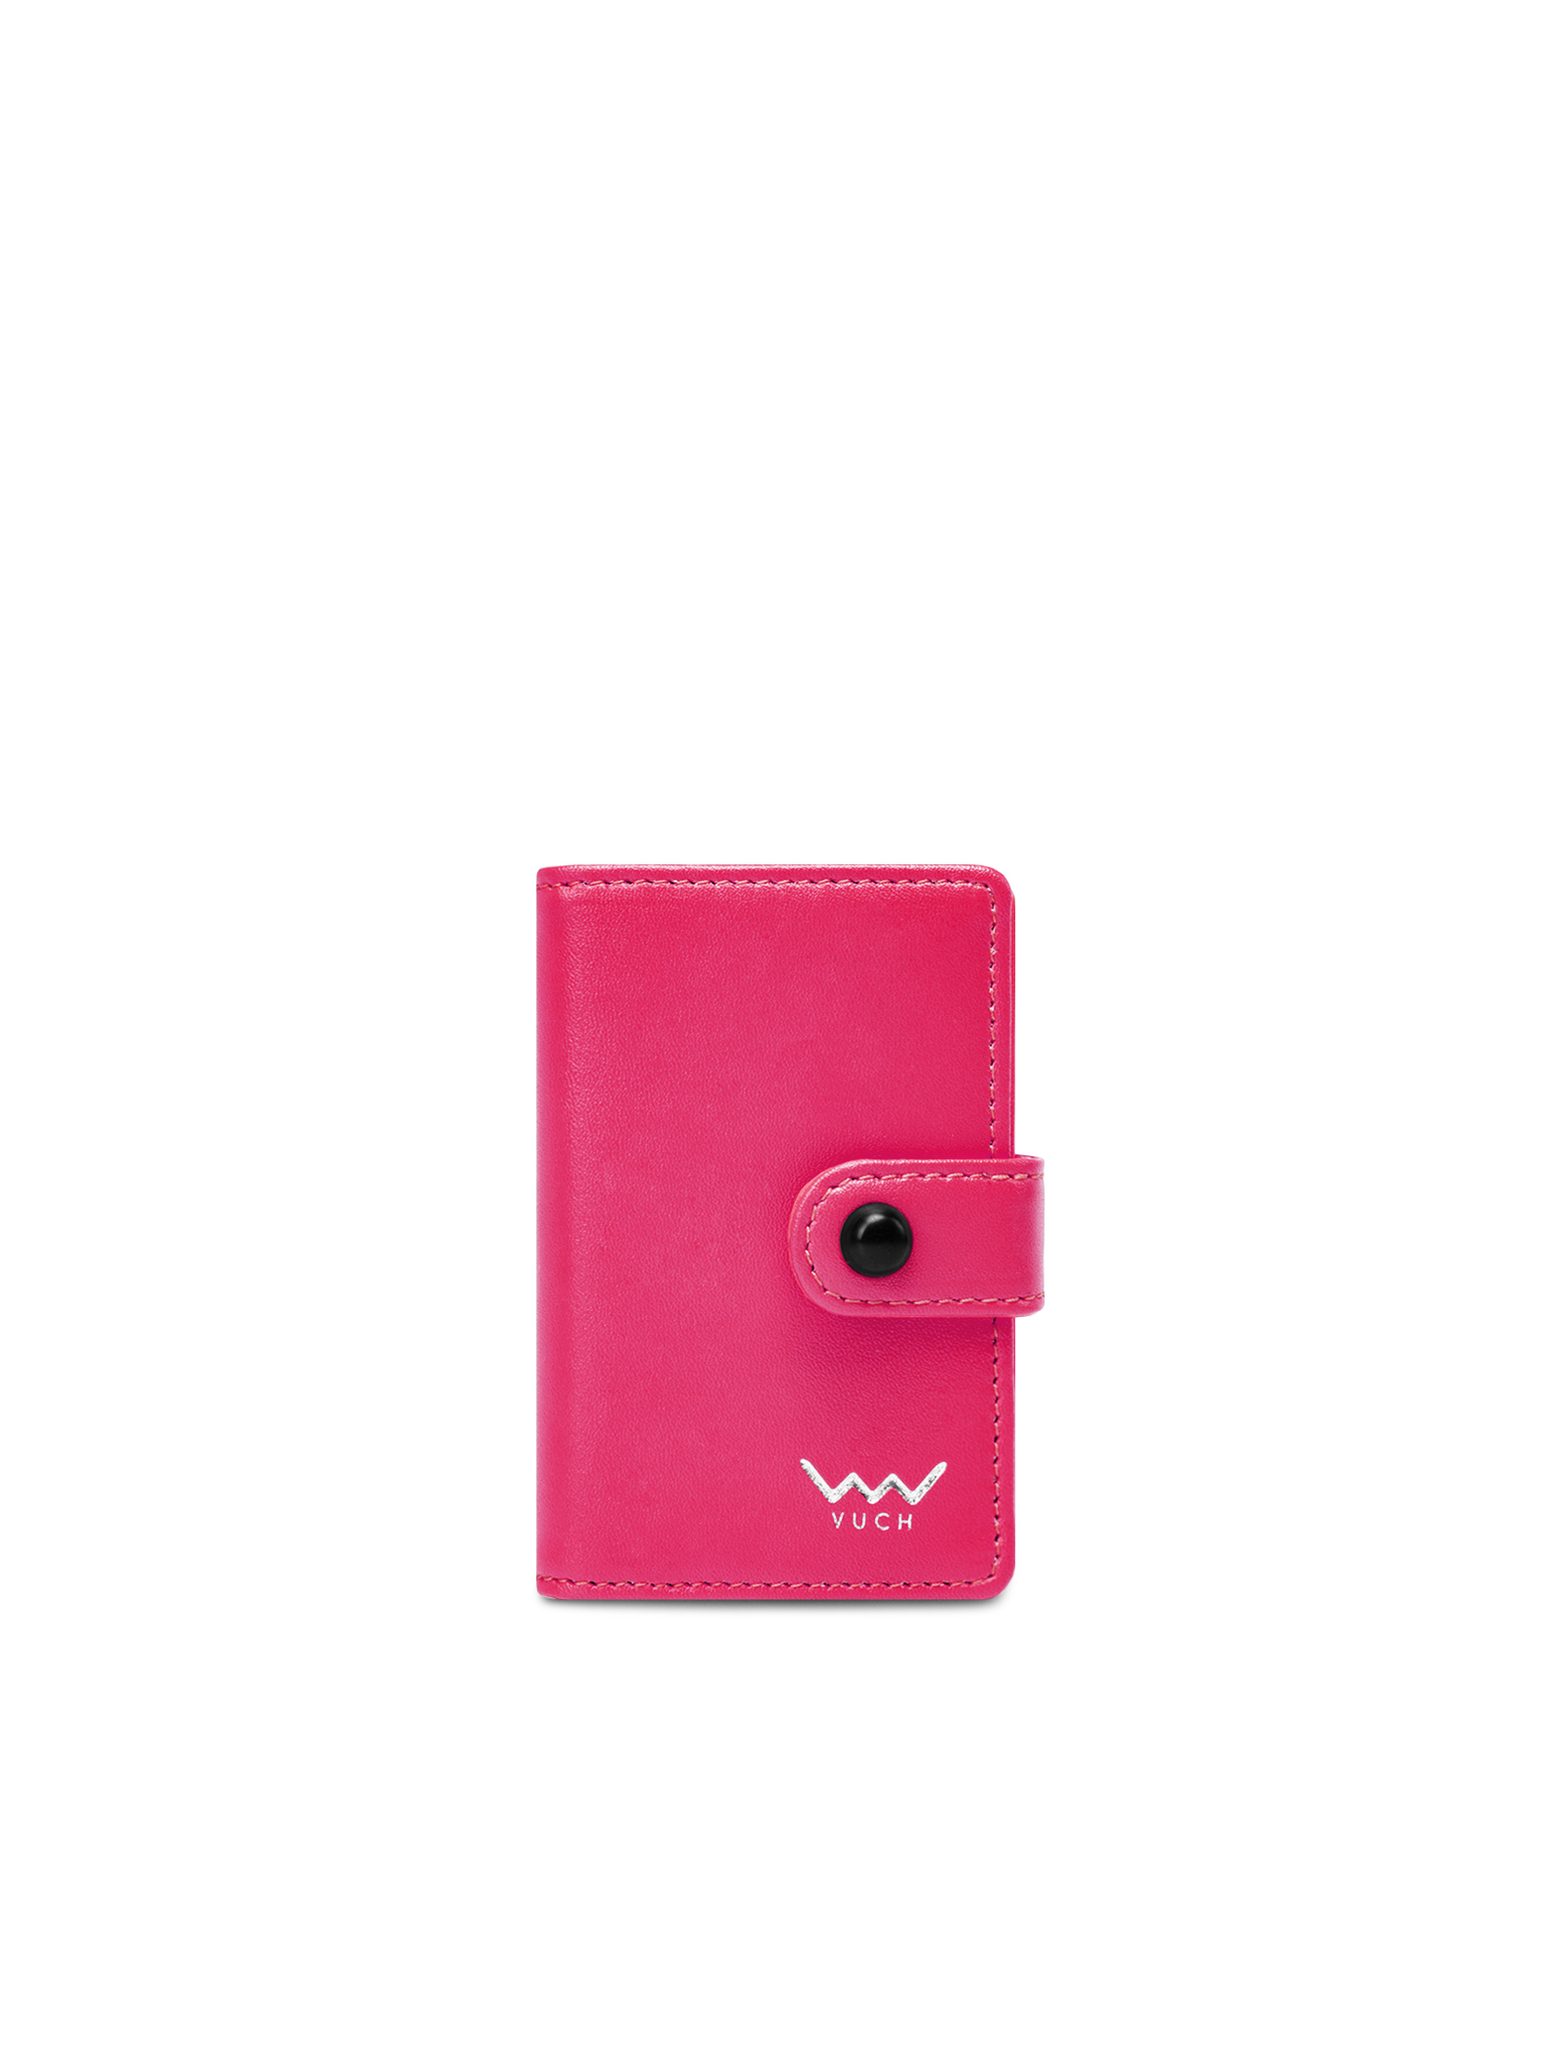 VUCH Rony Pink Wallet